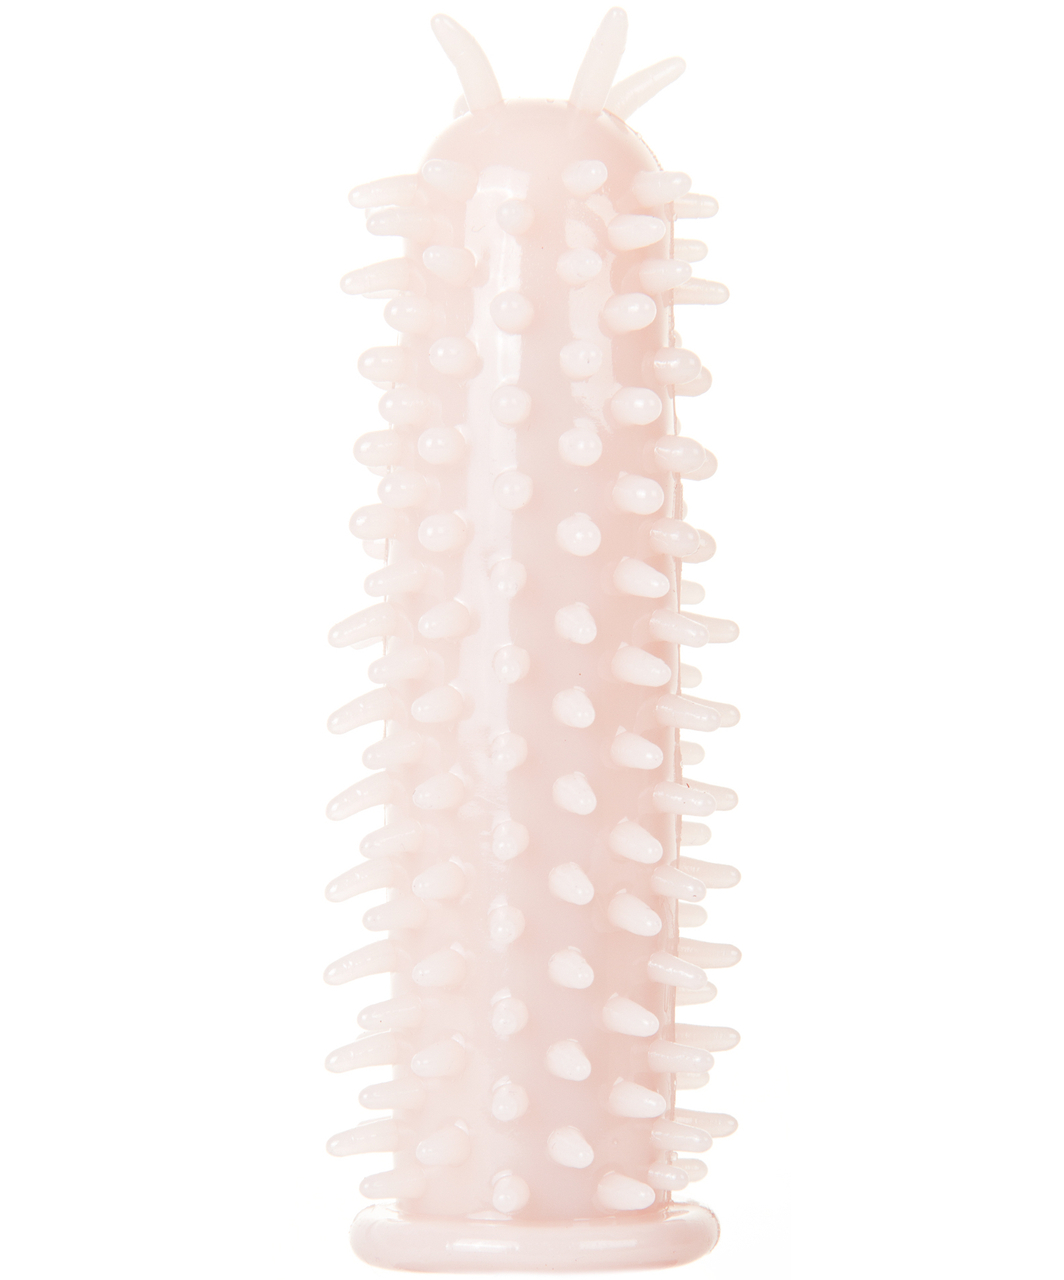 Shots Toys Spiky Penis Extension